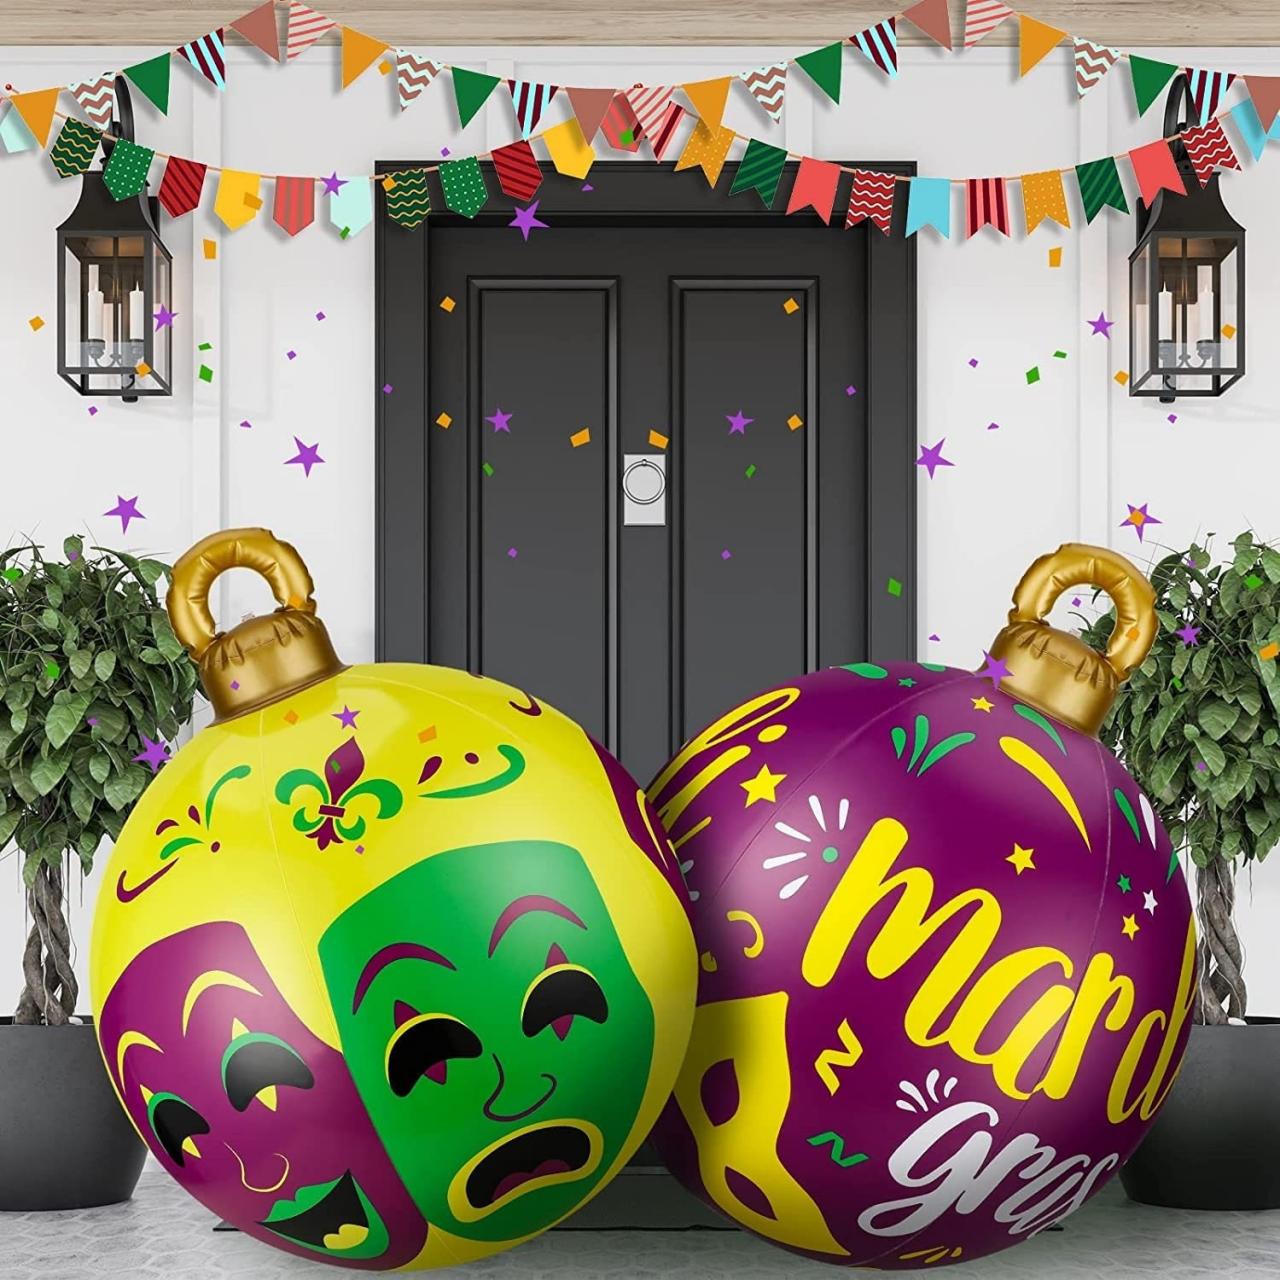 Ornament Outdoor/indoor Comedy Tragedy Inflatable Carnival Decorated Ball Inflatable Decoration Blow Up Yard Garden Lawn Party